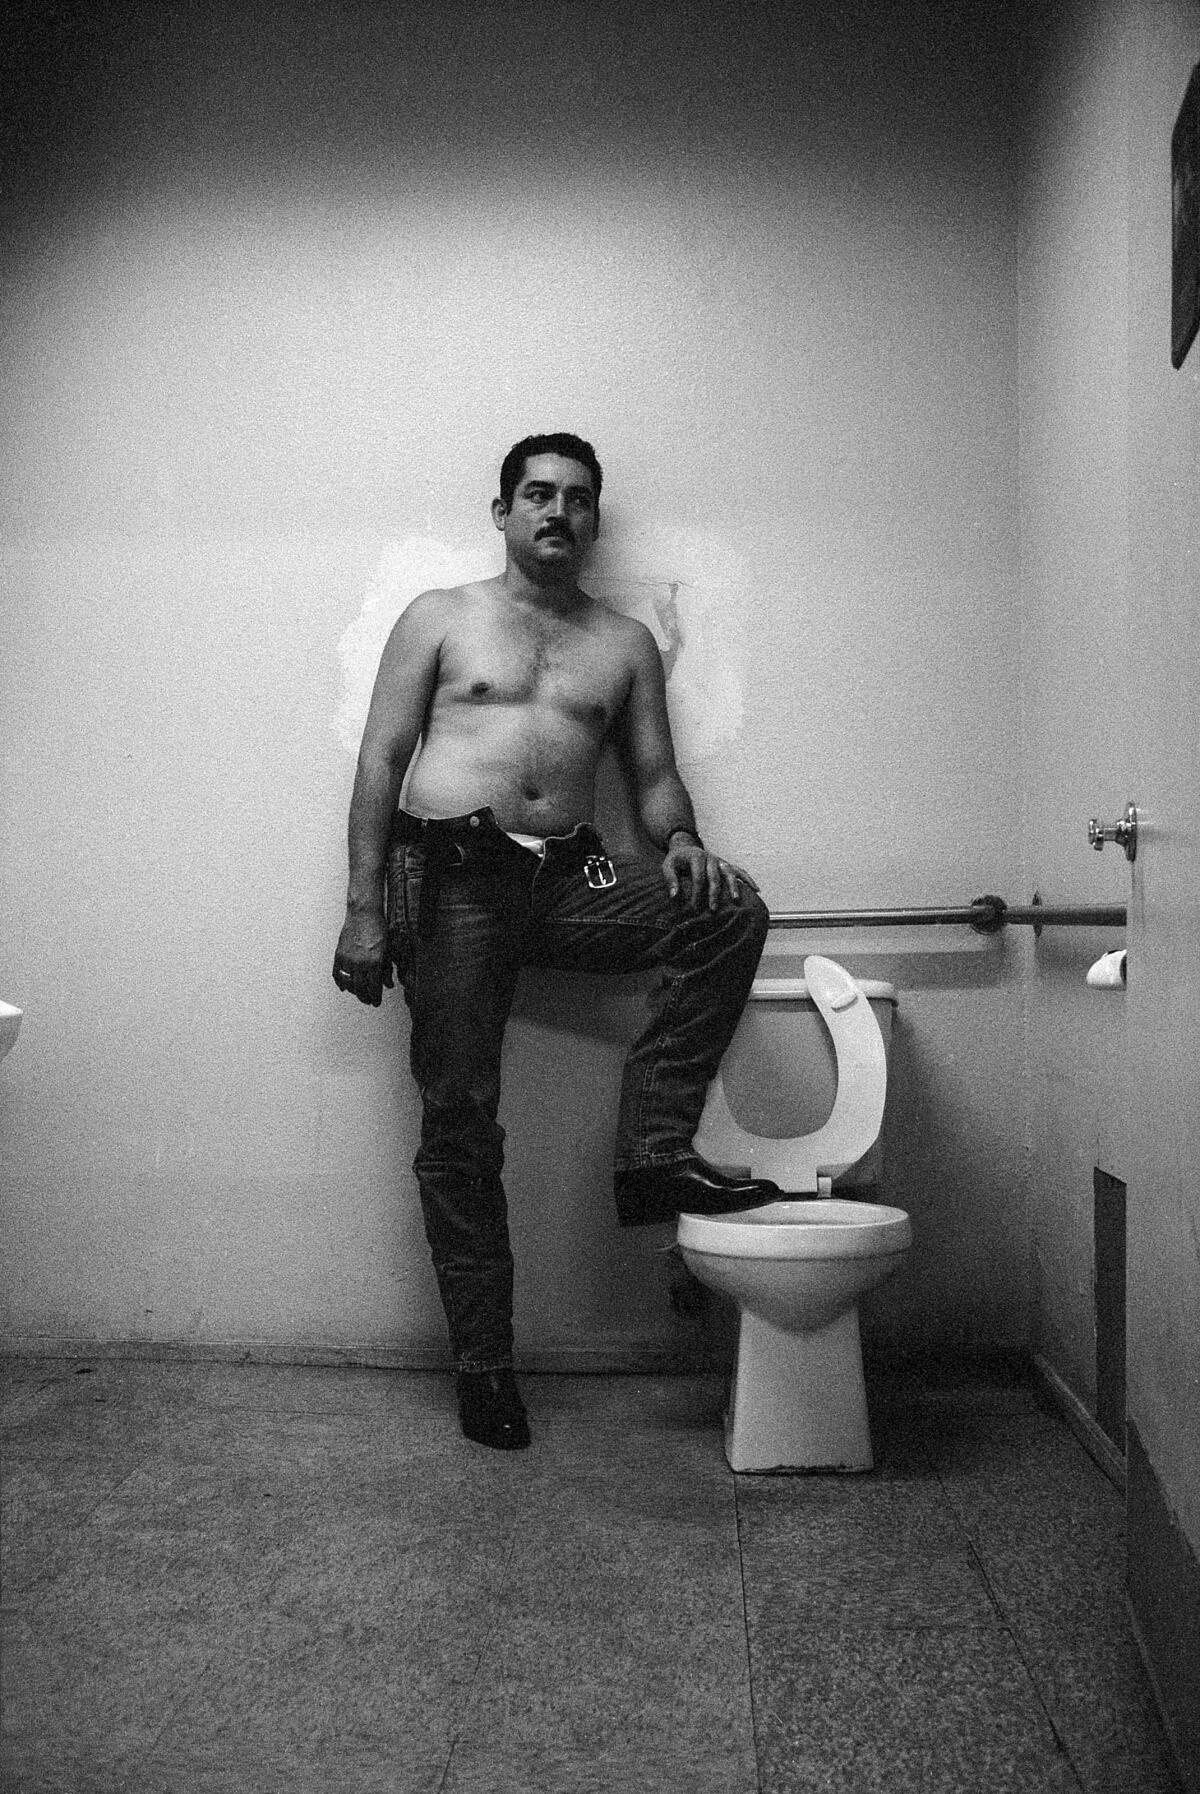 A shirtless man stands in a bathroom, his foot jauntily perched on the edge of a toilet